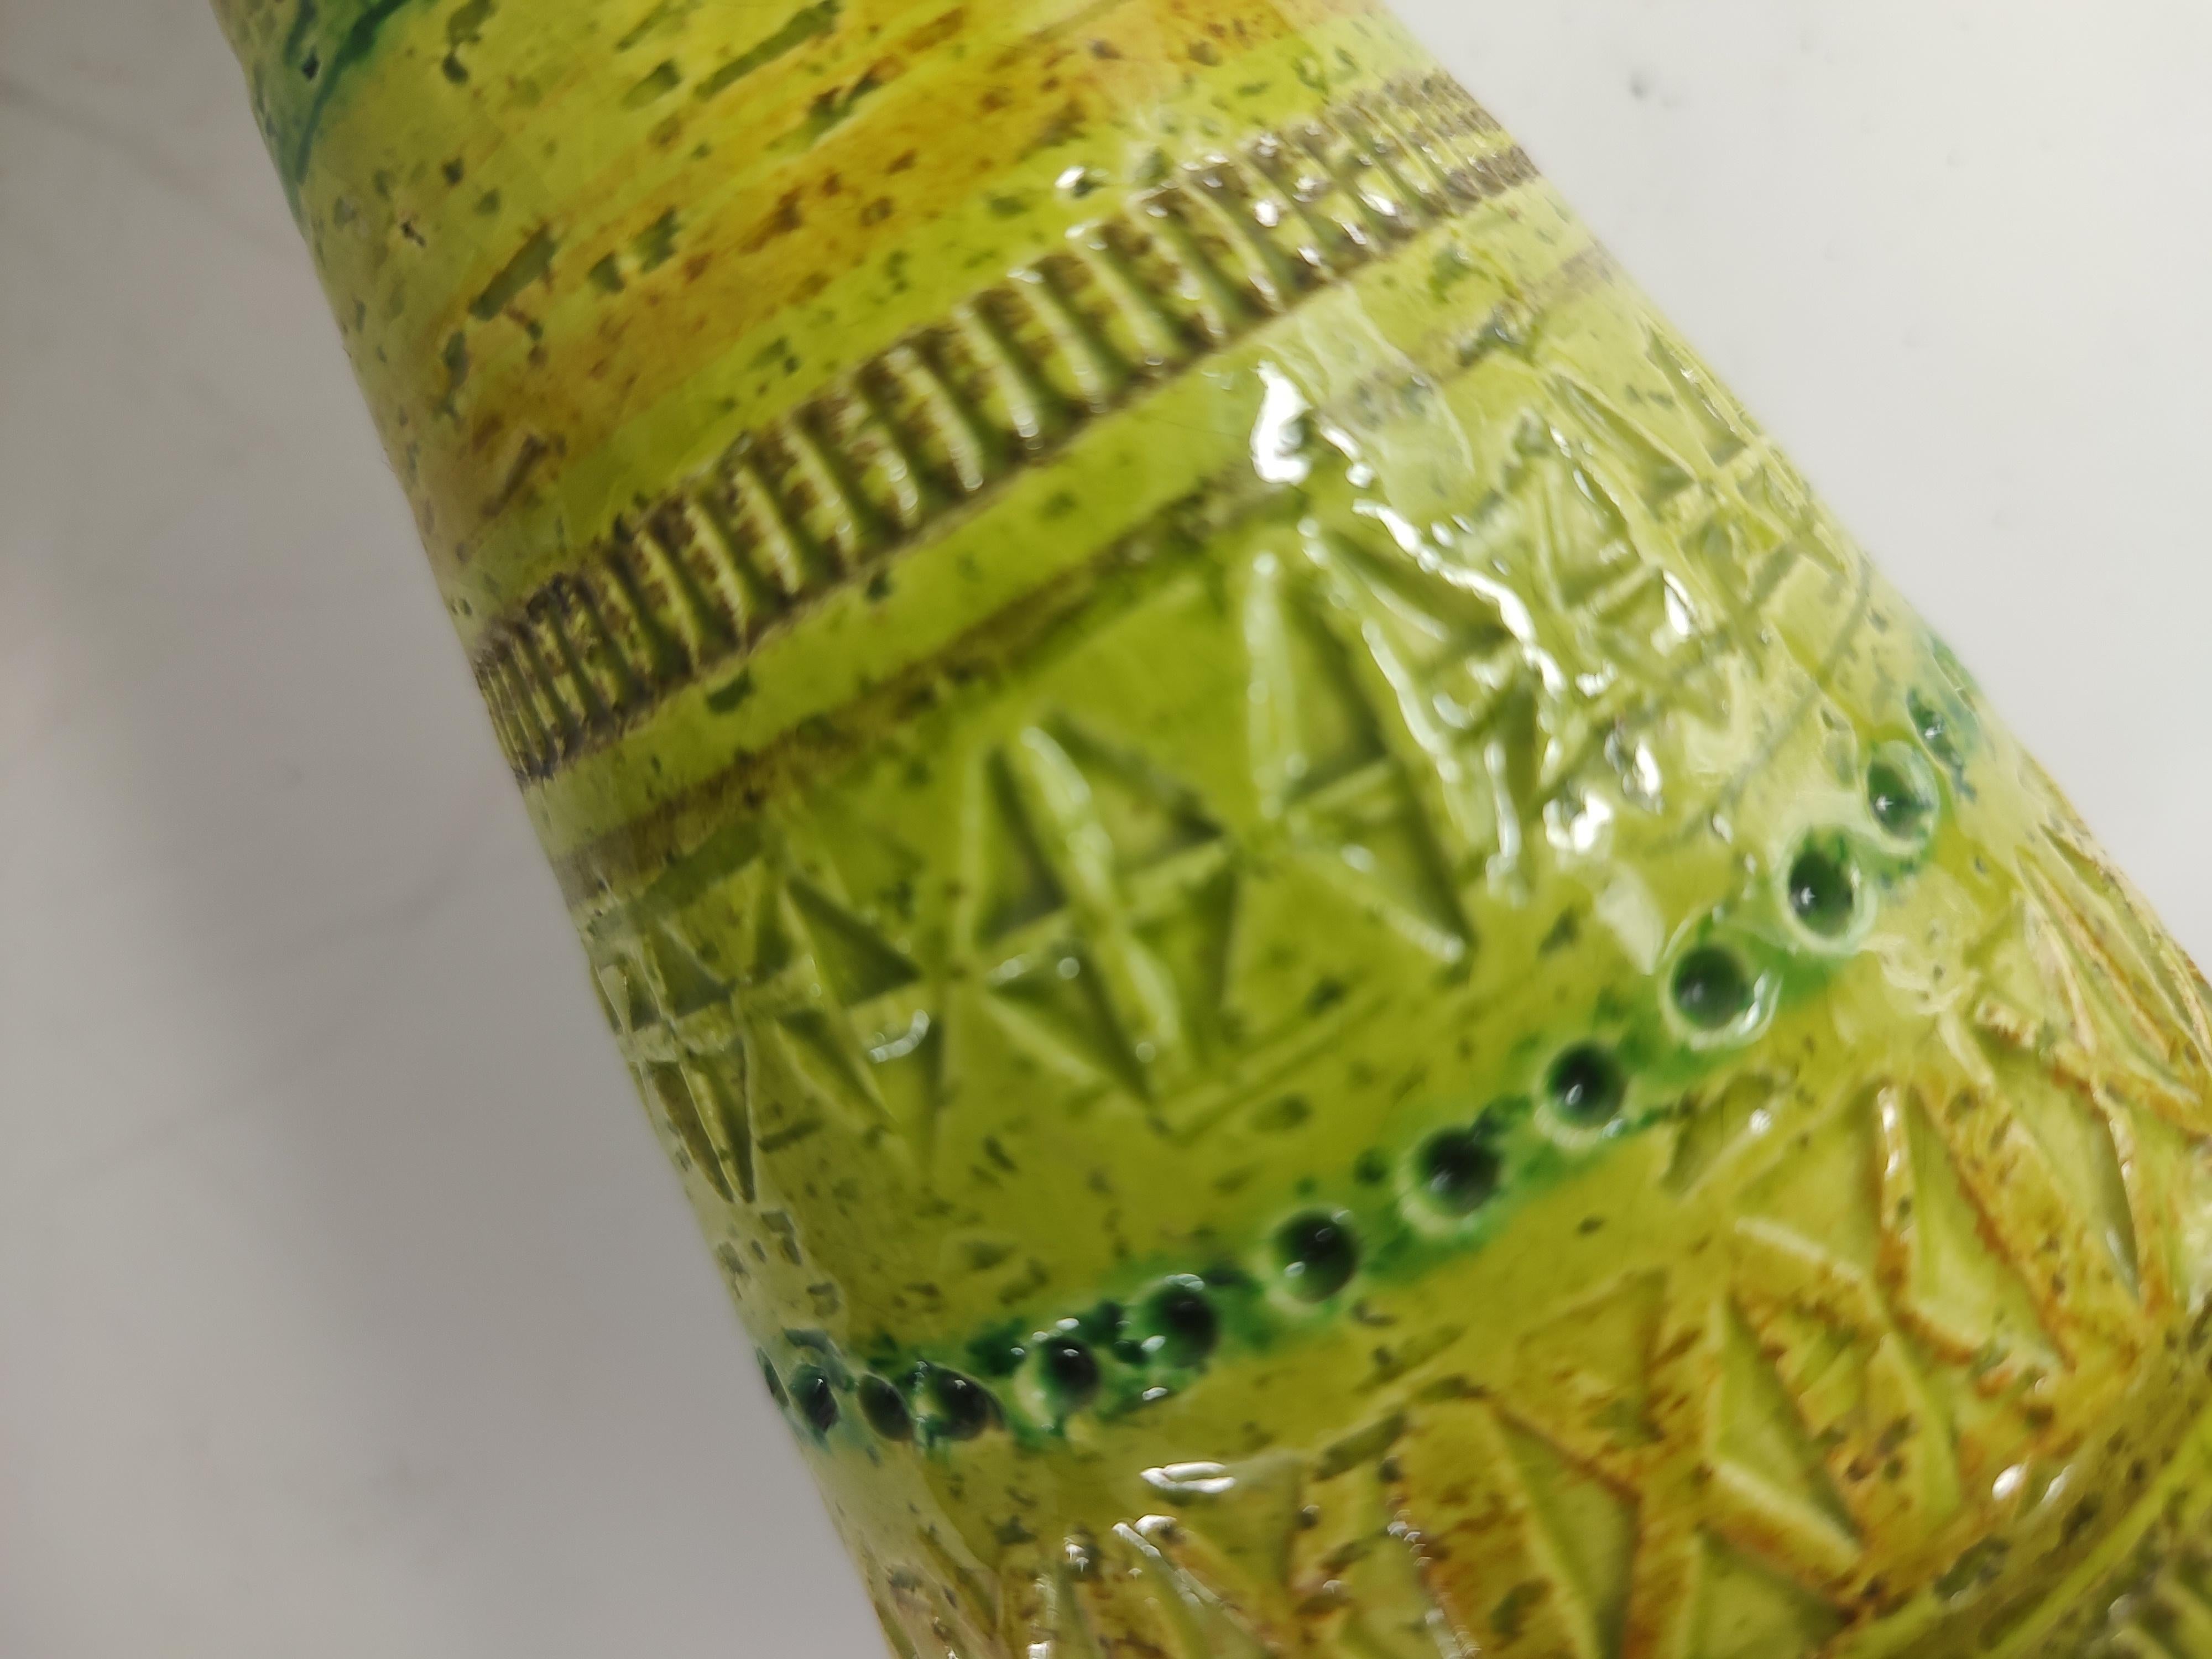 Fantastic pair of Mid-Century Modern Sculptural art pottery vases / candleholders. Amazing colors greens and yellows banded along symmetrically with archaic impressions. In excellent vintage condition with no visible chips or cracks. Priced and sold